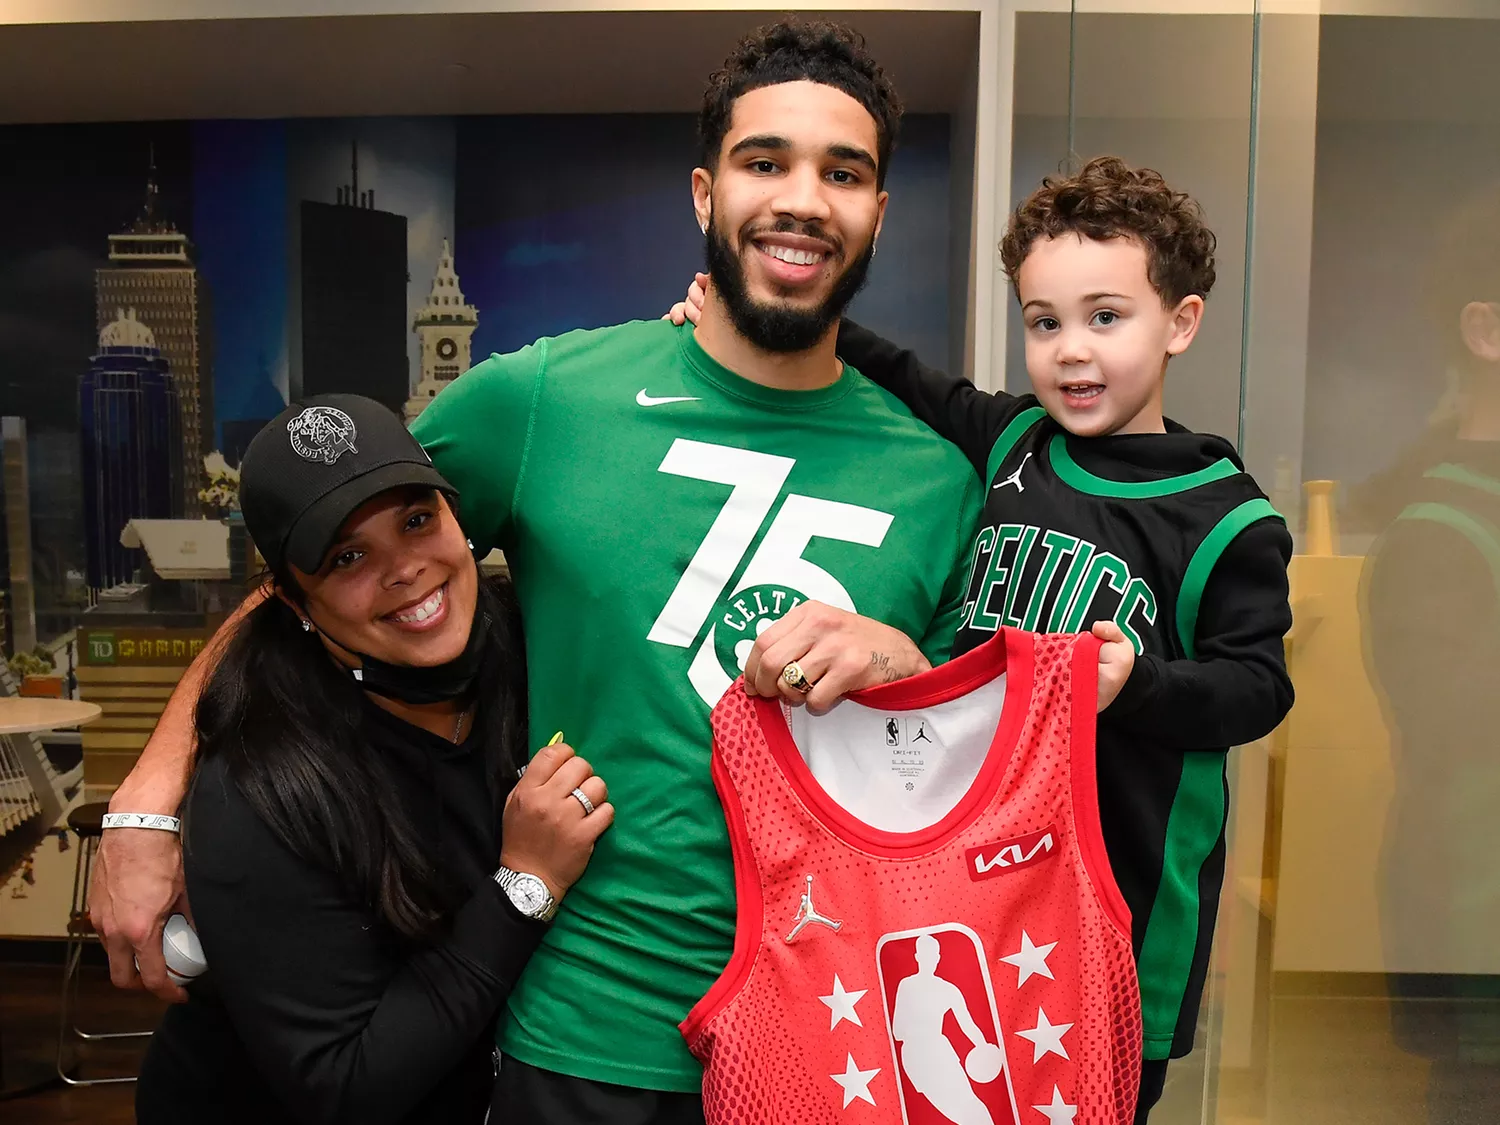 All about Justin Tatum and Brandy Cole-Barnes parents of Jayson Tatum, 1 of the 'LUCKY KIDS' whose parents supported him from high school and college basketball, all the way to the NBA